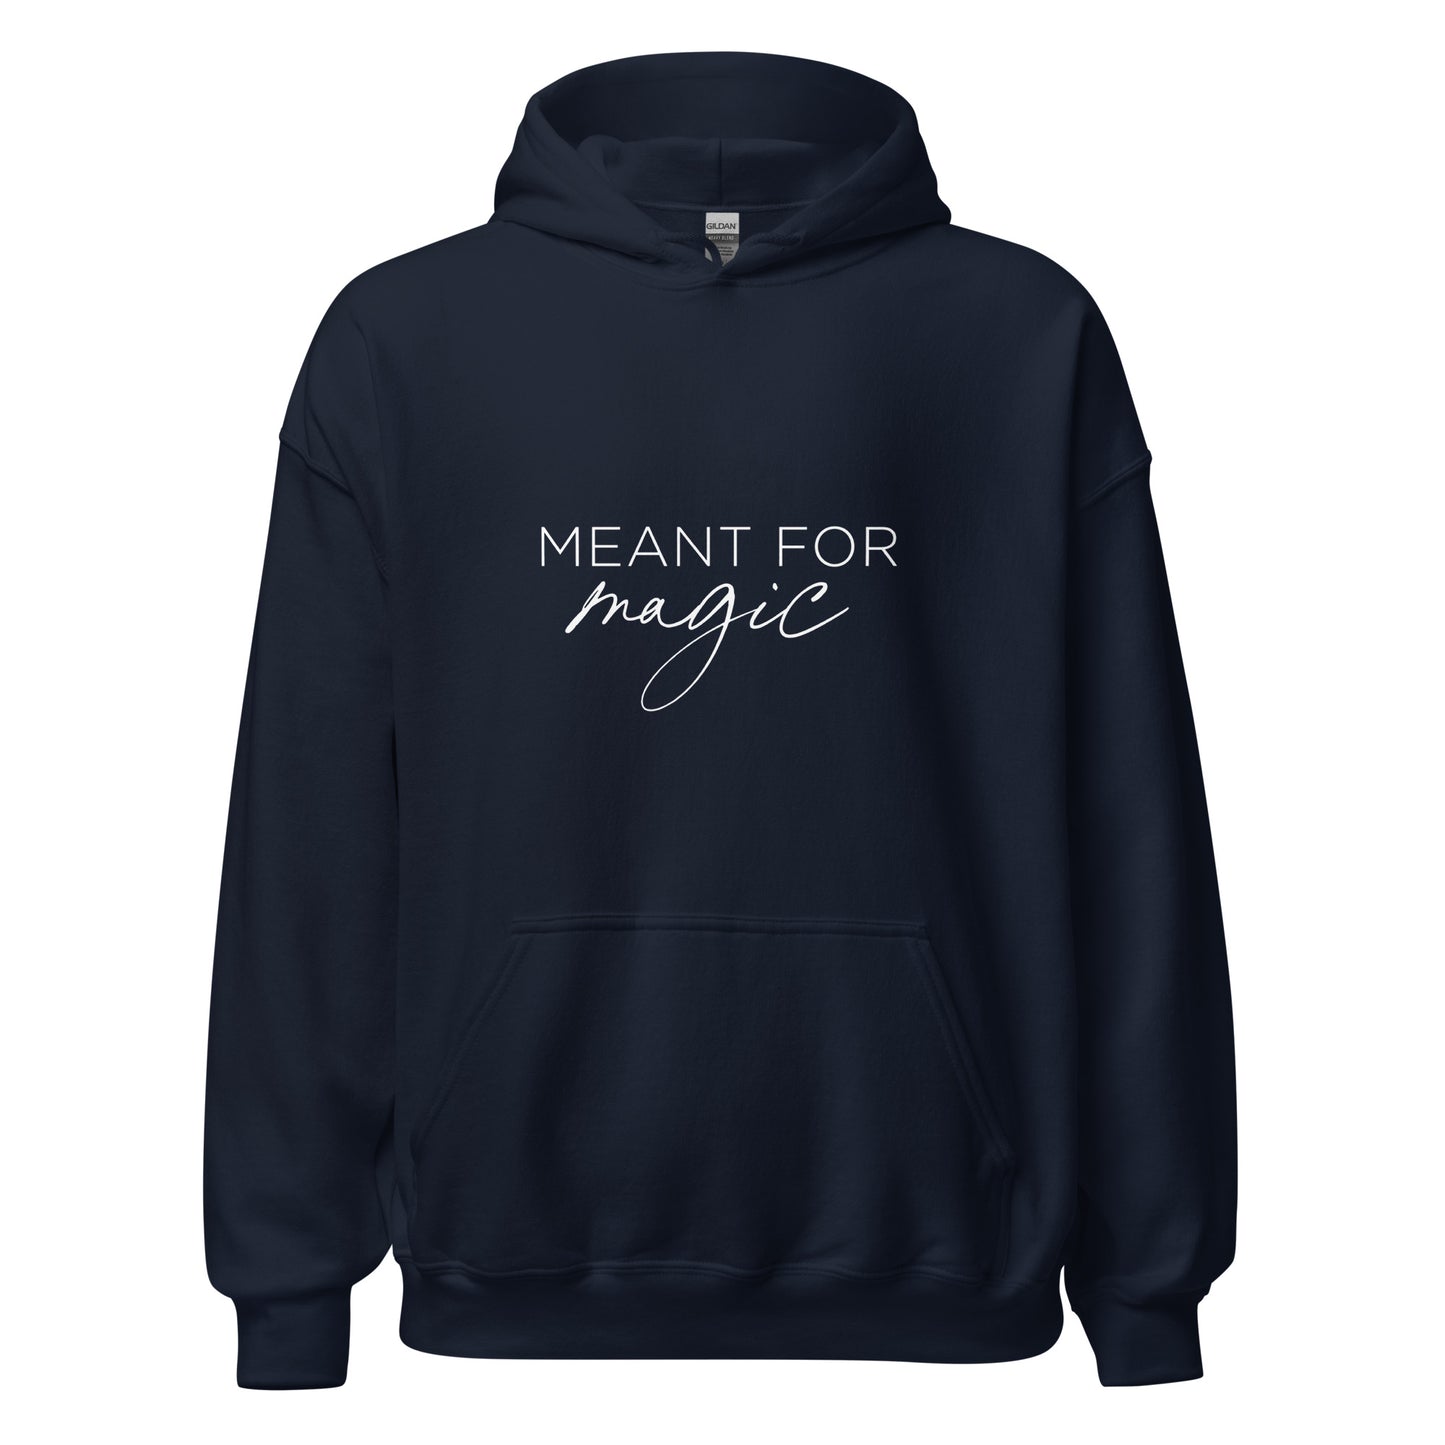 The Meant for Magic Hoodie